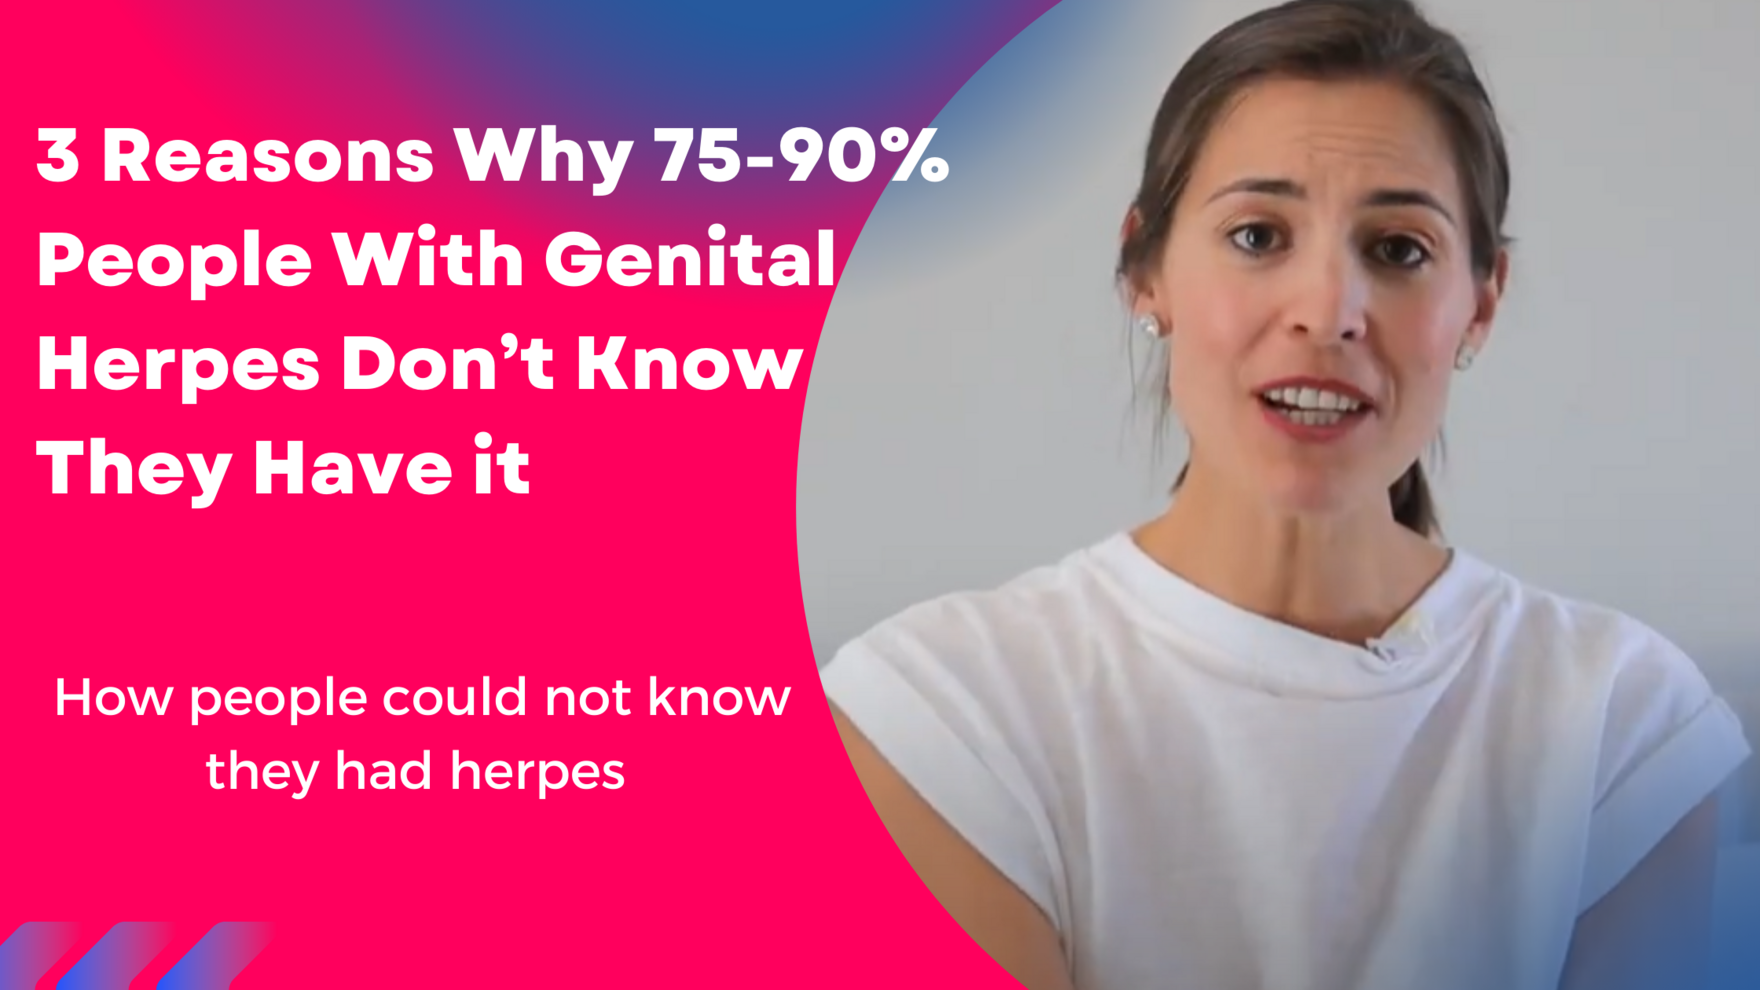 3 Reasons Why 75-90% People With Genital Herpes Don’t Know They Have Genital Herpes (Blog Banner)